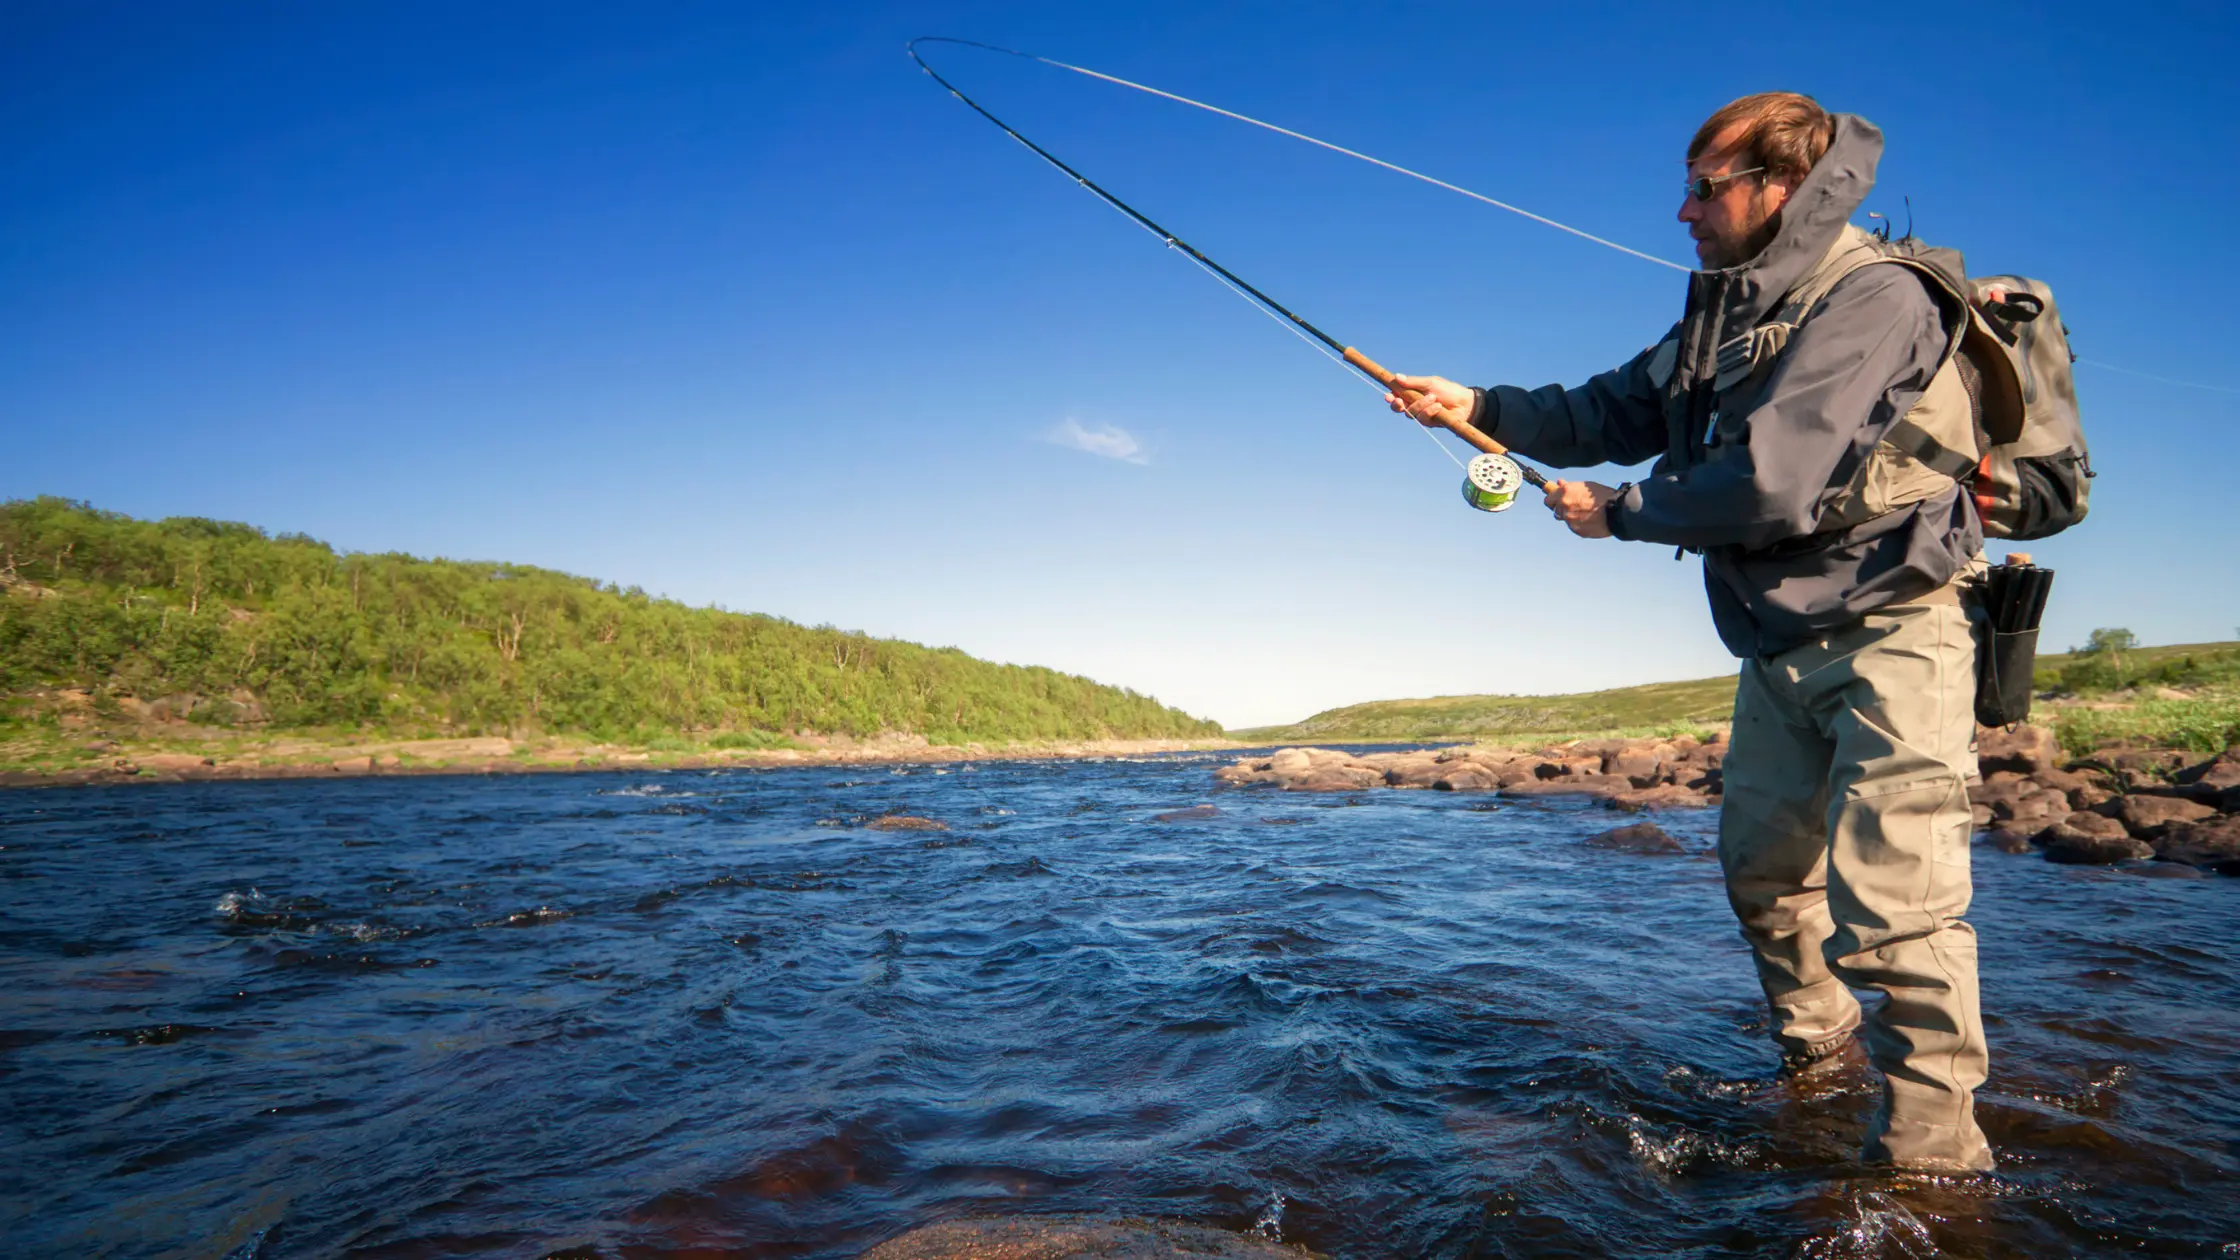 Why Do Fly Fishermen Stand In The Water?